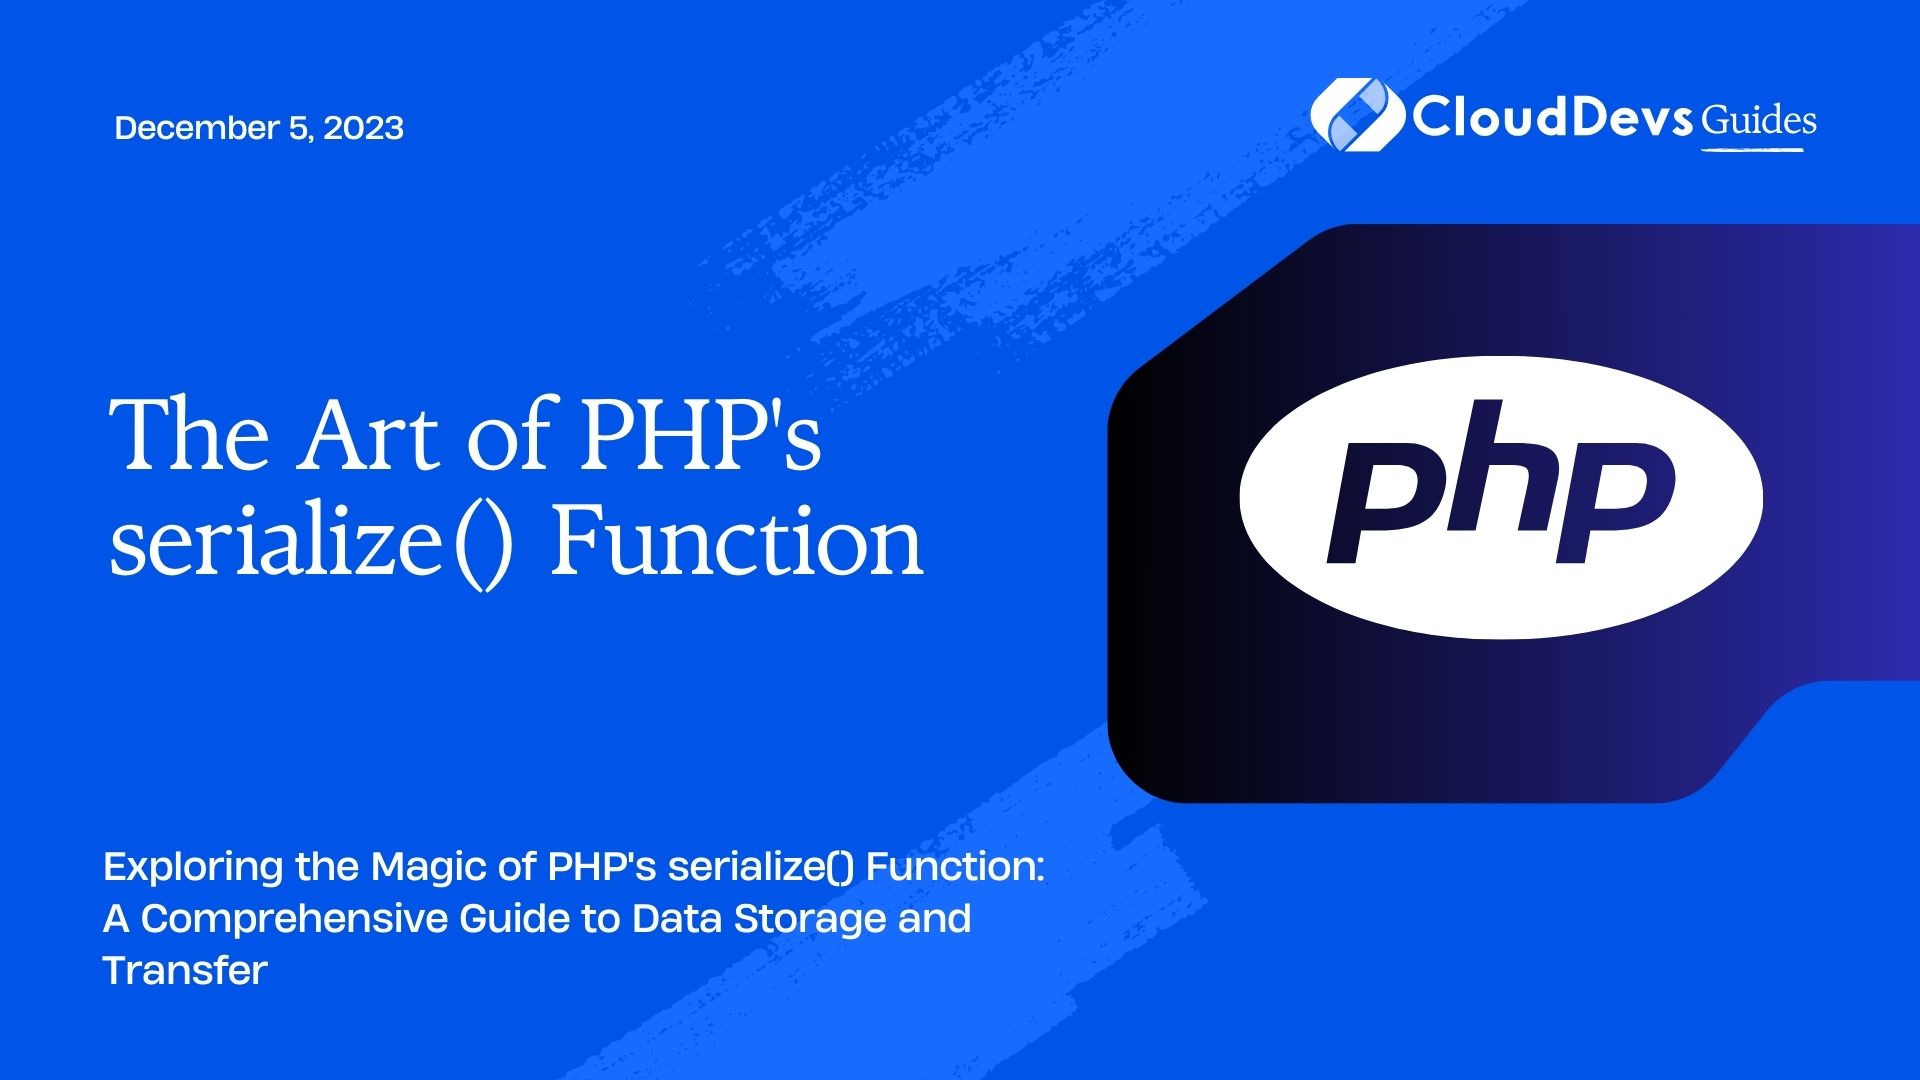 The Art of PHP's serialize() Function